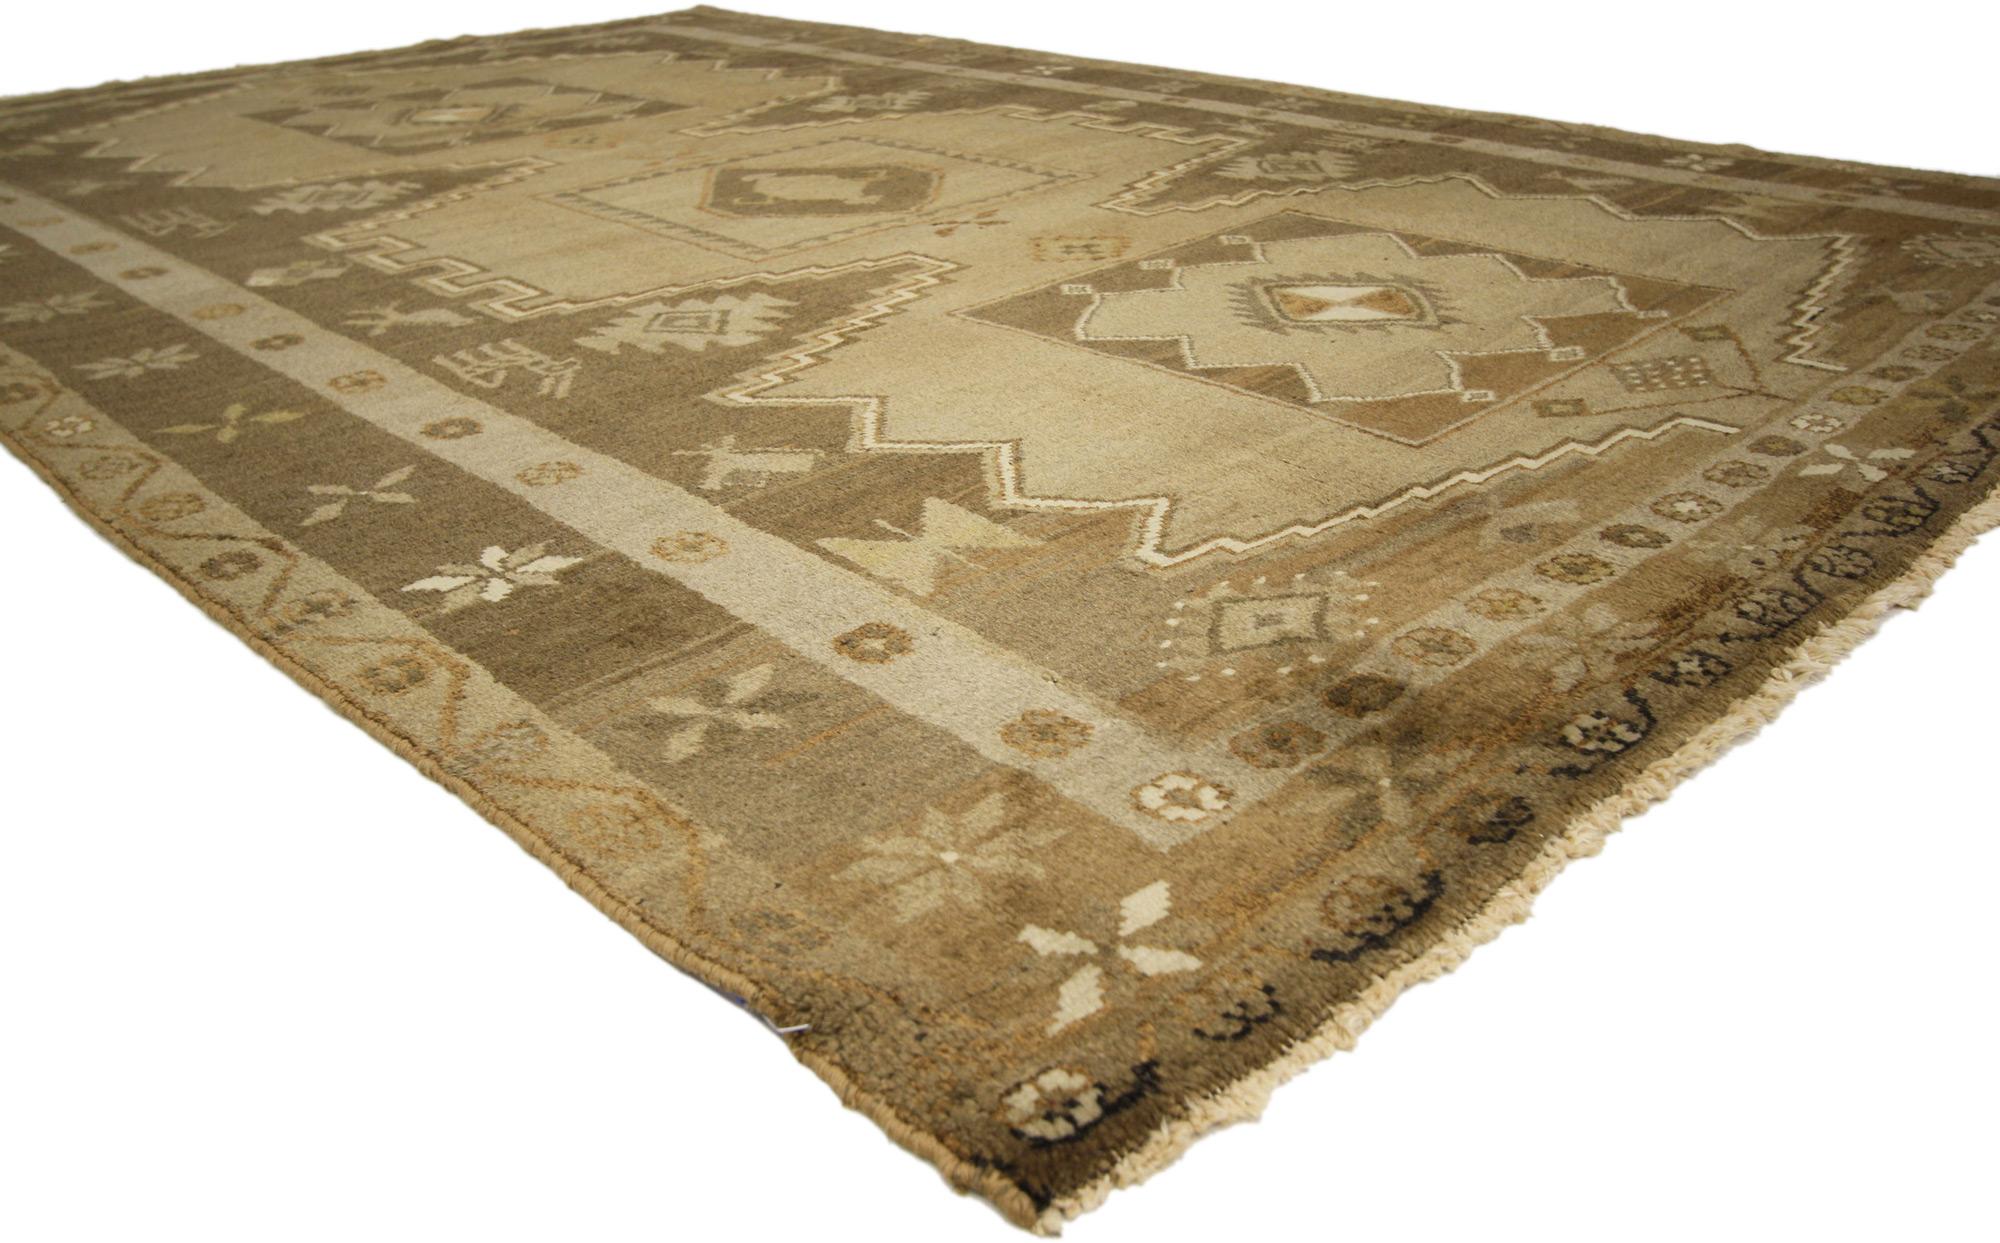 76034 Vintage Persian Hamadan Rug, 06'06 X 09'09. 
Delightfully distinctive, this hand-knotted wool vintage Persian Hamadan rug handsomely combines Mid-Century Modern style with Persian history. This vintage Hamadan rug features a stepped cut-out